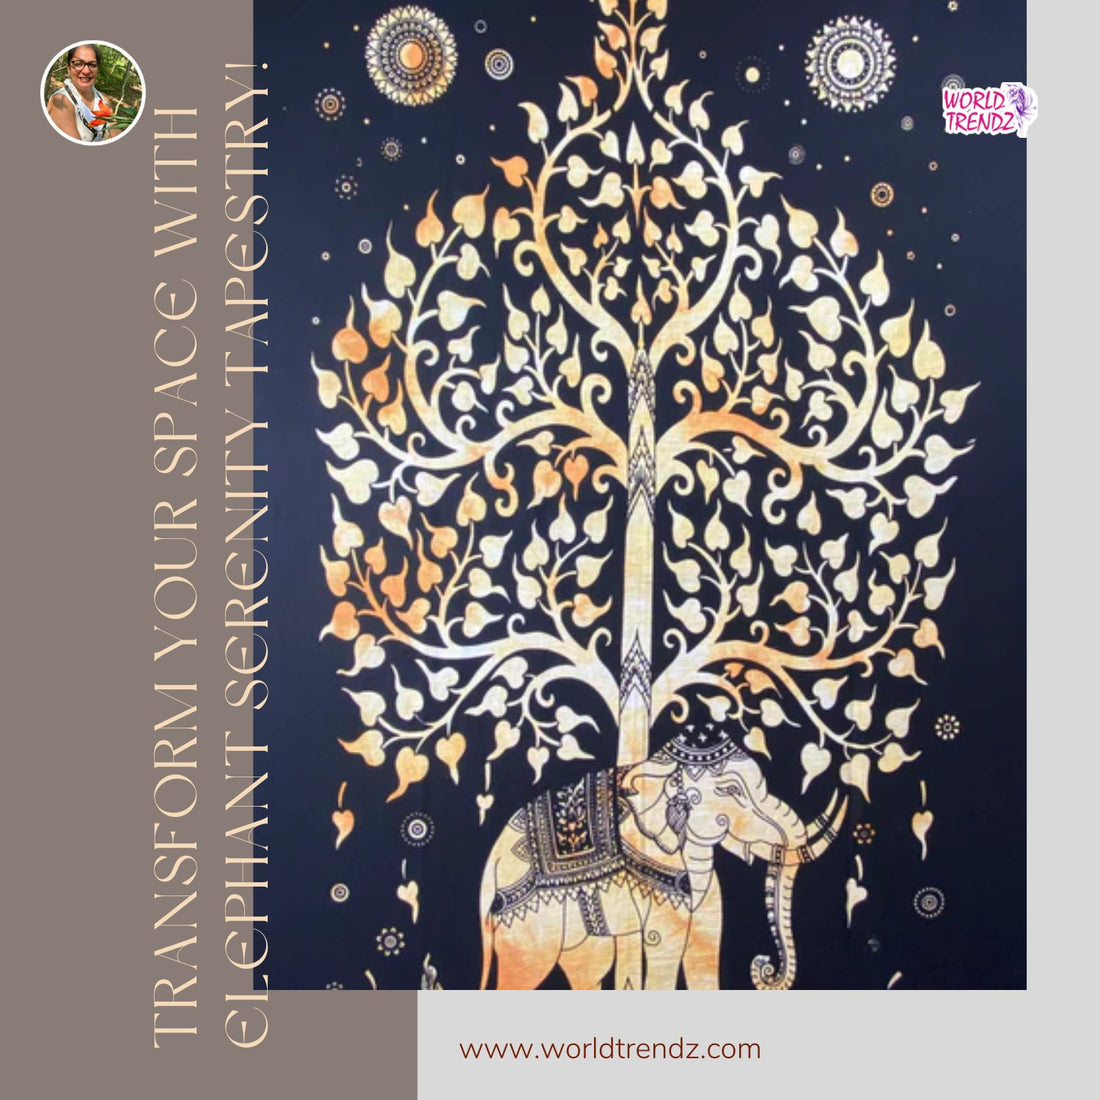 Transform Your Space with the Stunning Elephant Bodhi Tree Tapestry - Poster Size in Orange and Black Background!